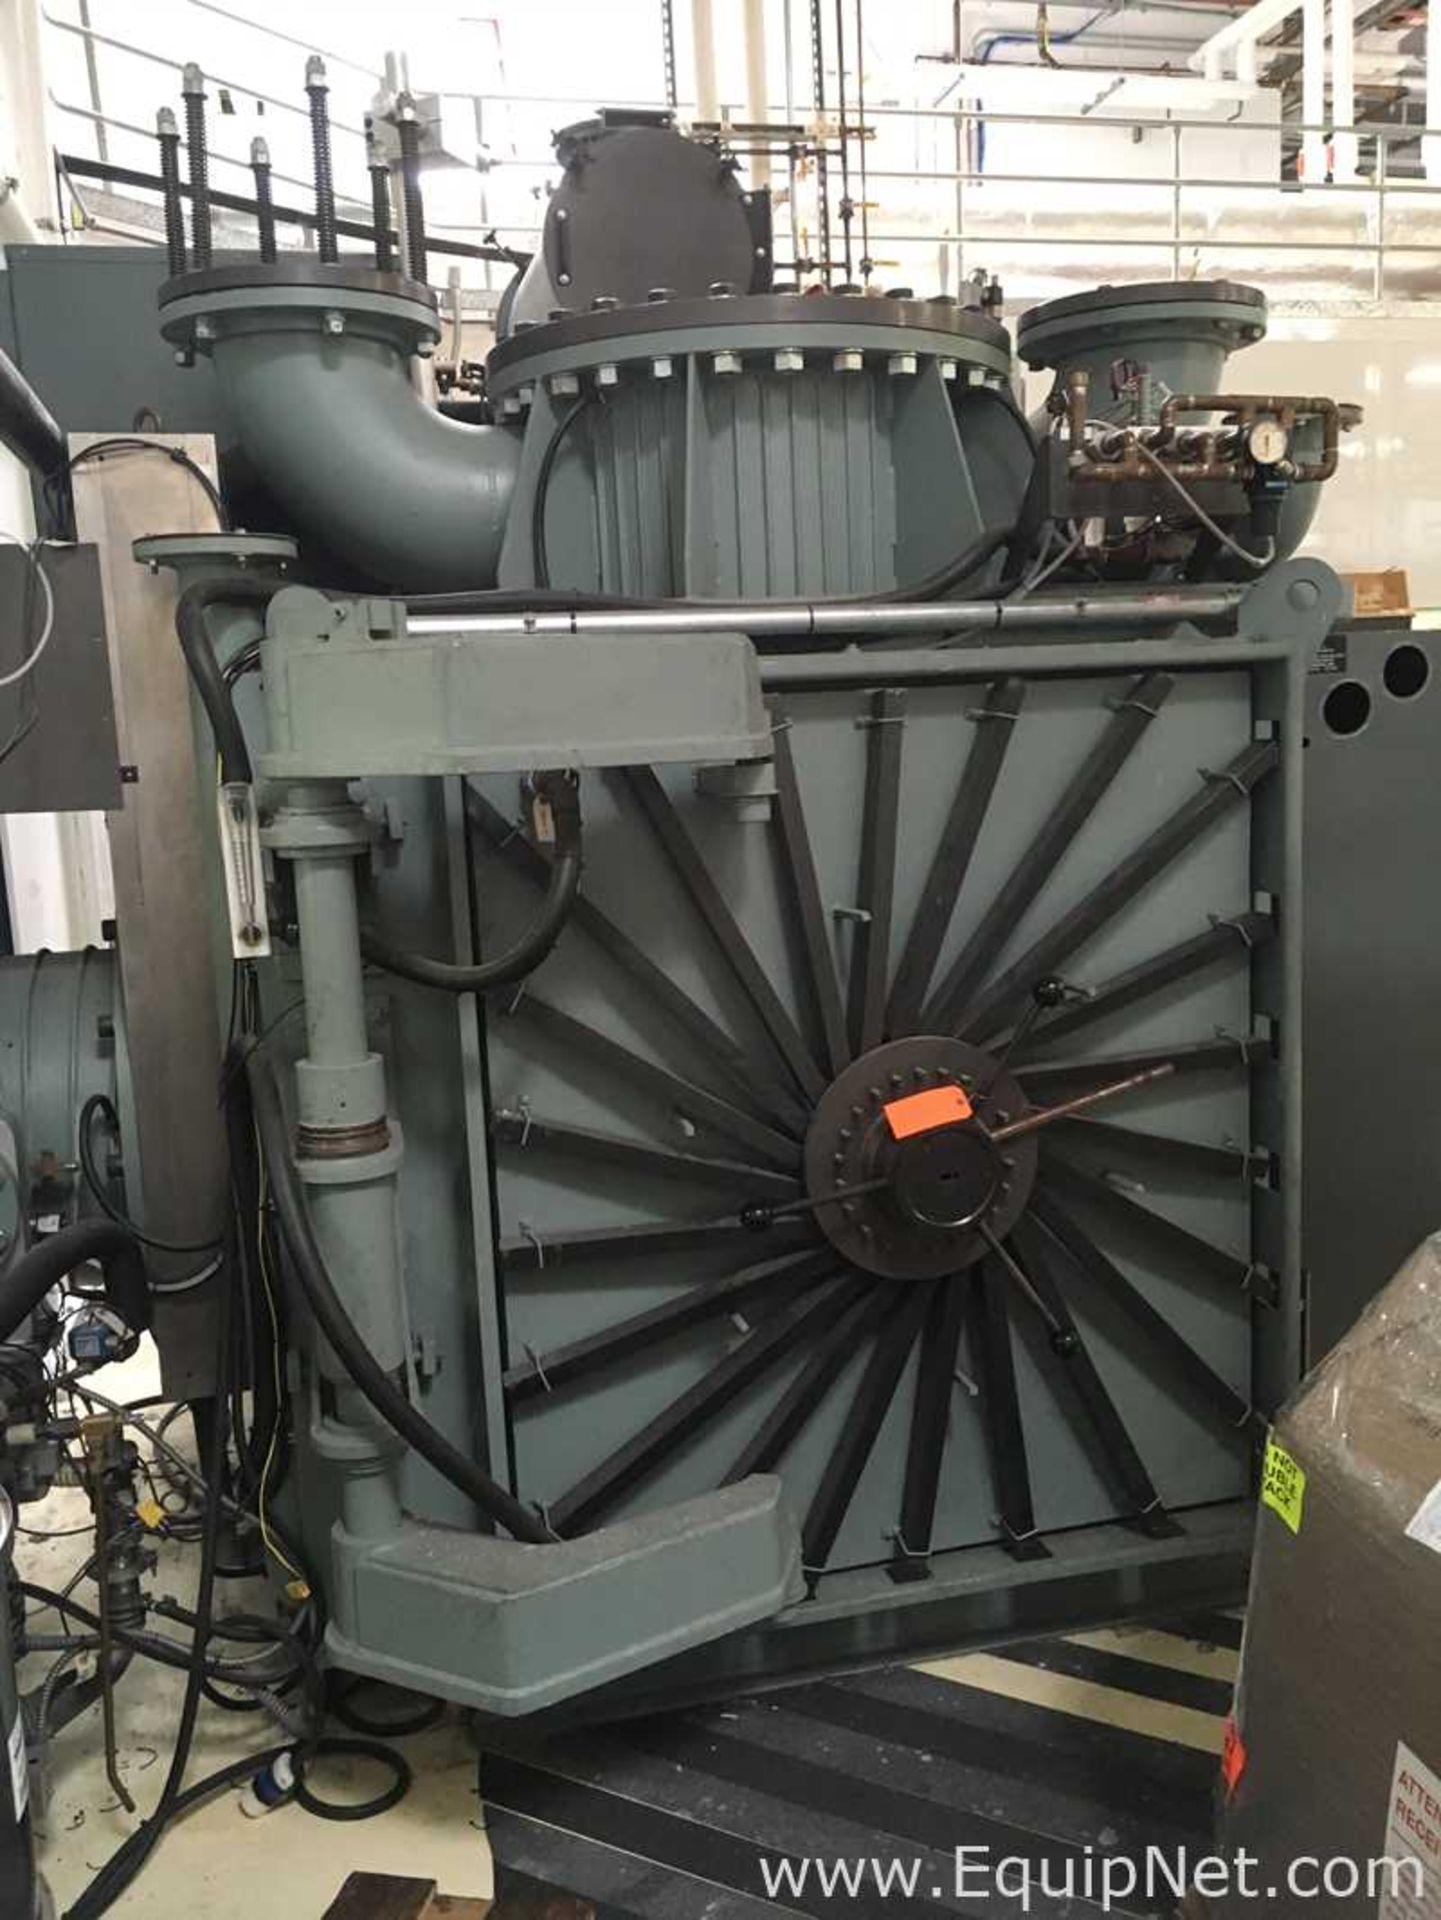 The Furnace Source 2300 DegC Vacuum Furnace for Parts or Rebuild - Image 9 of 13